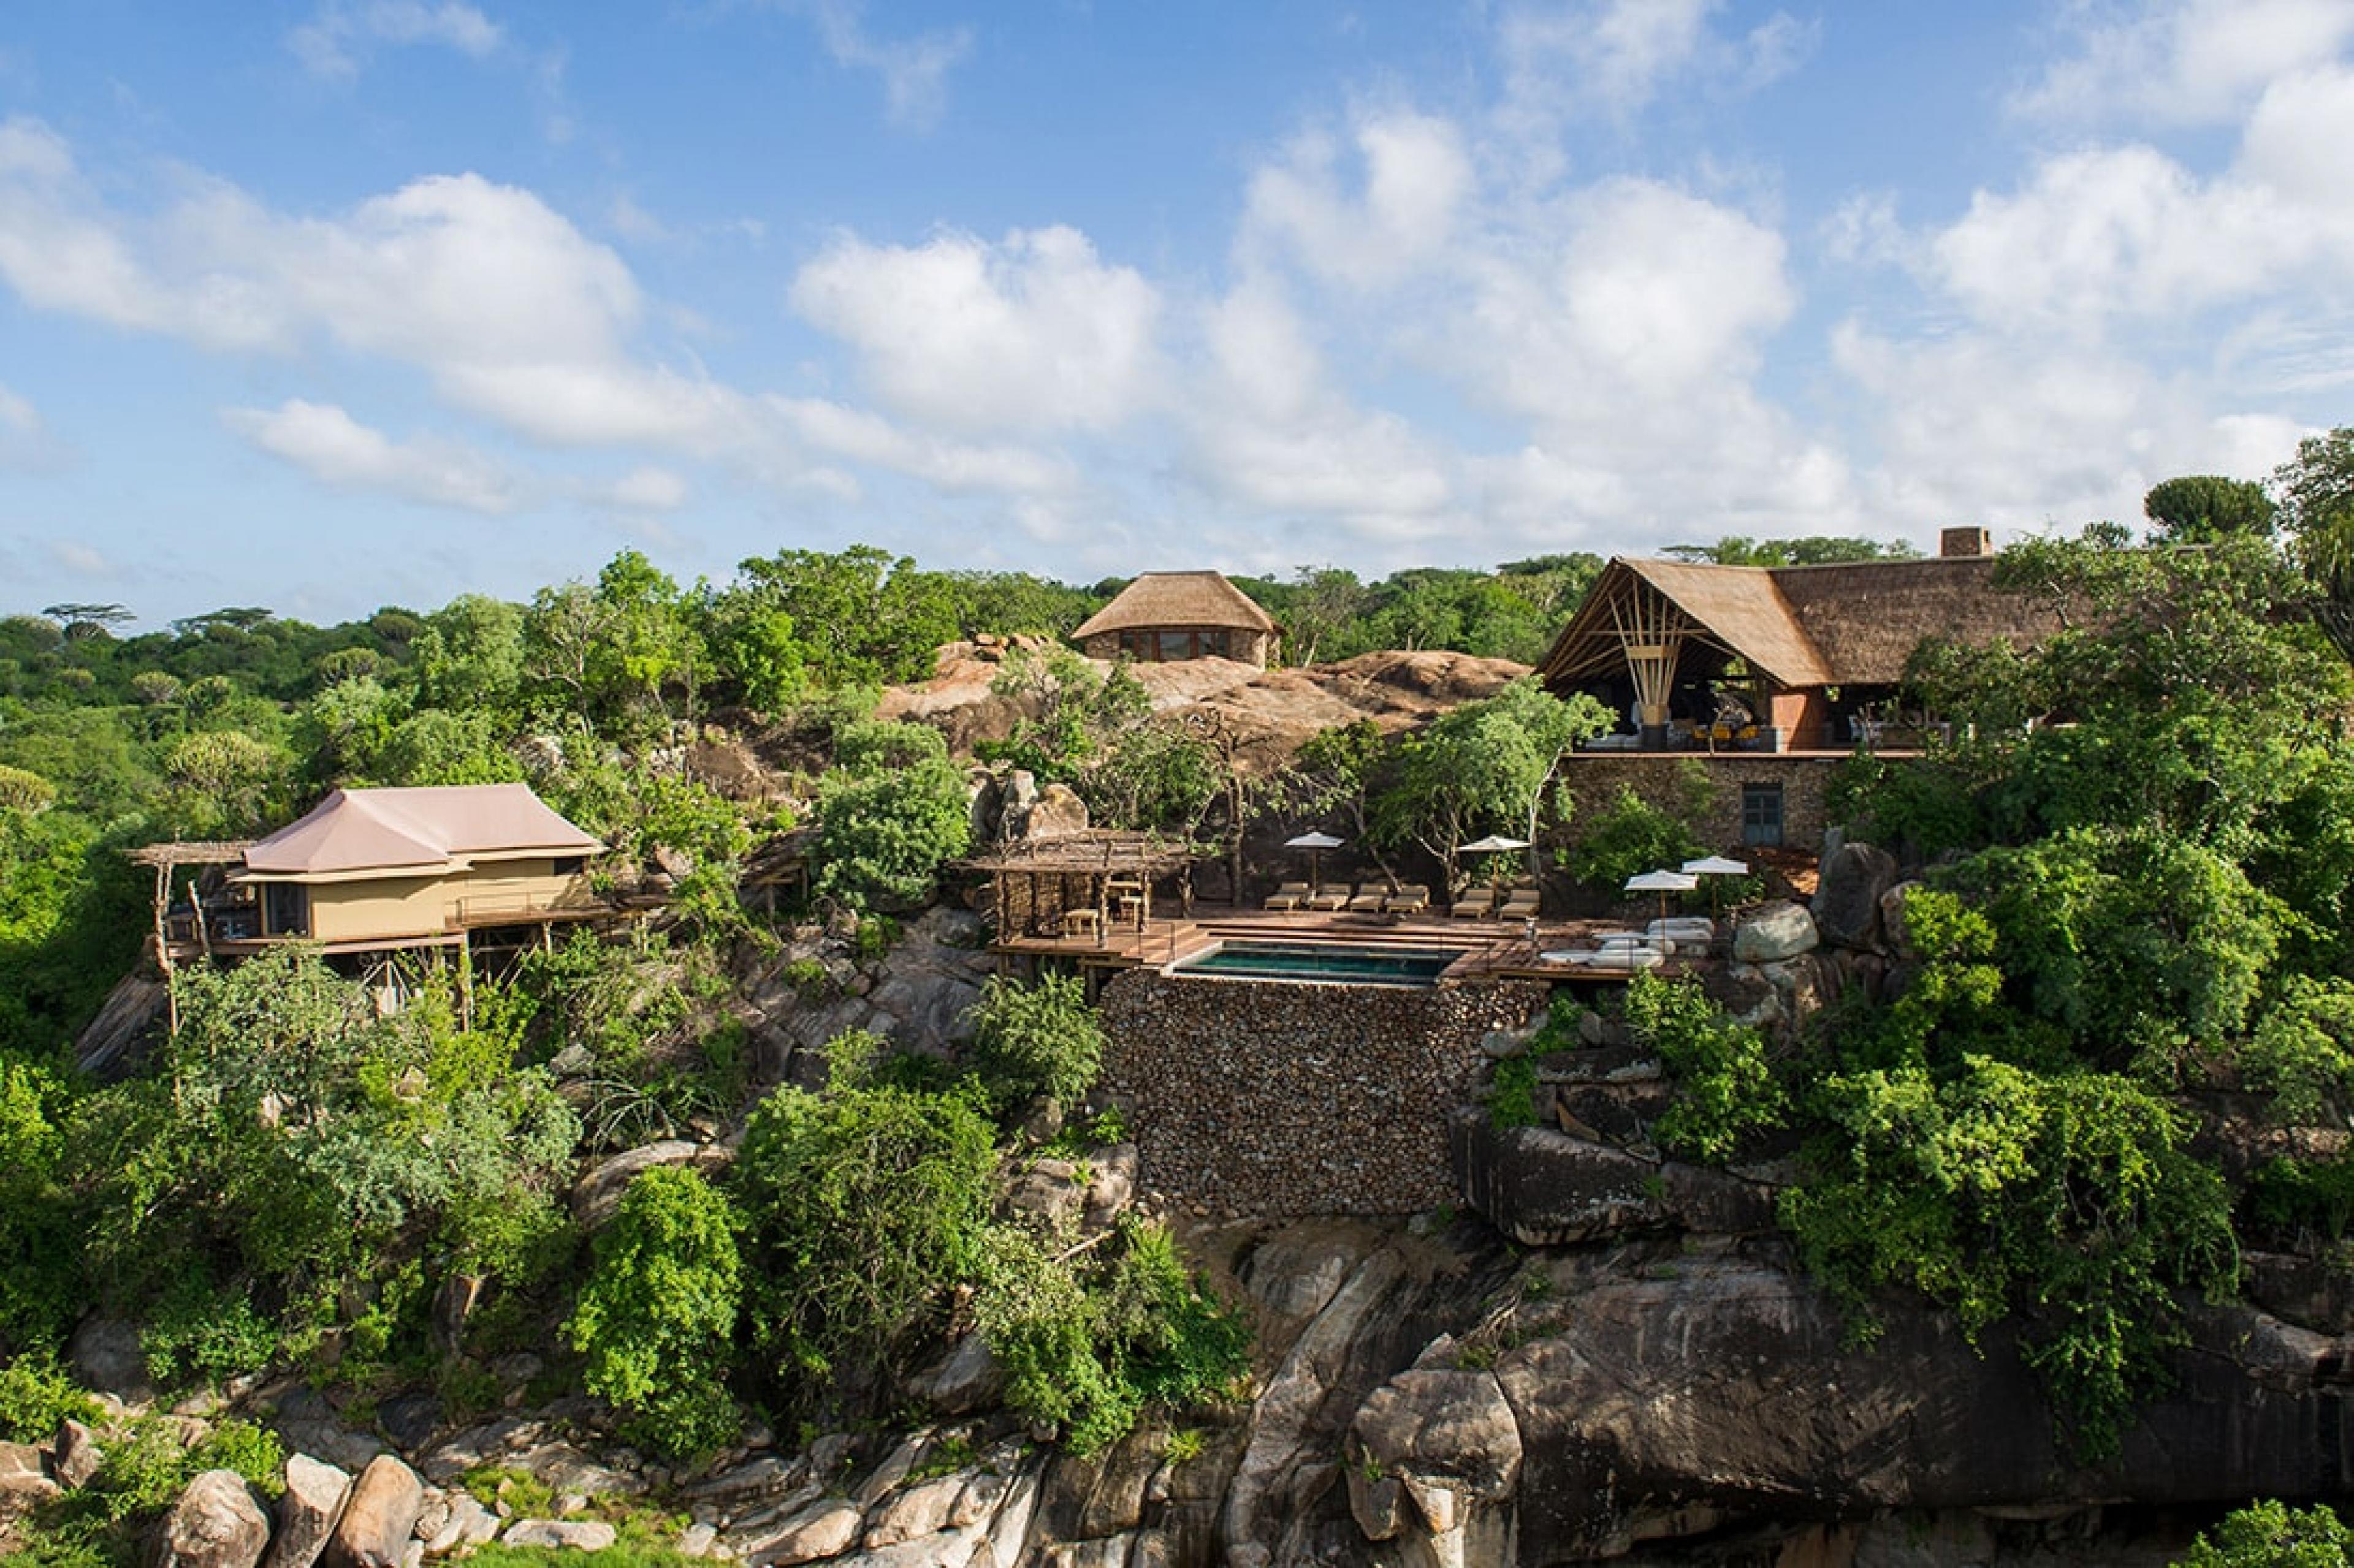 view of Mwiba Lodge from above, with lodge appearing on ledge surrounded by trees